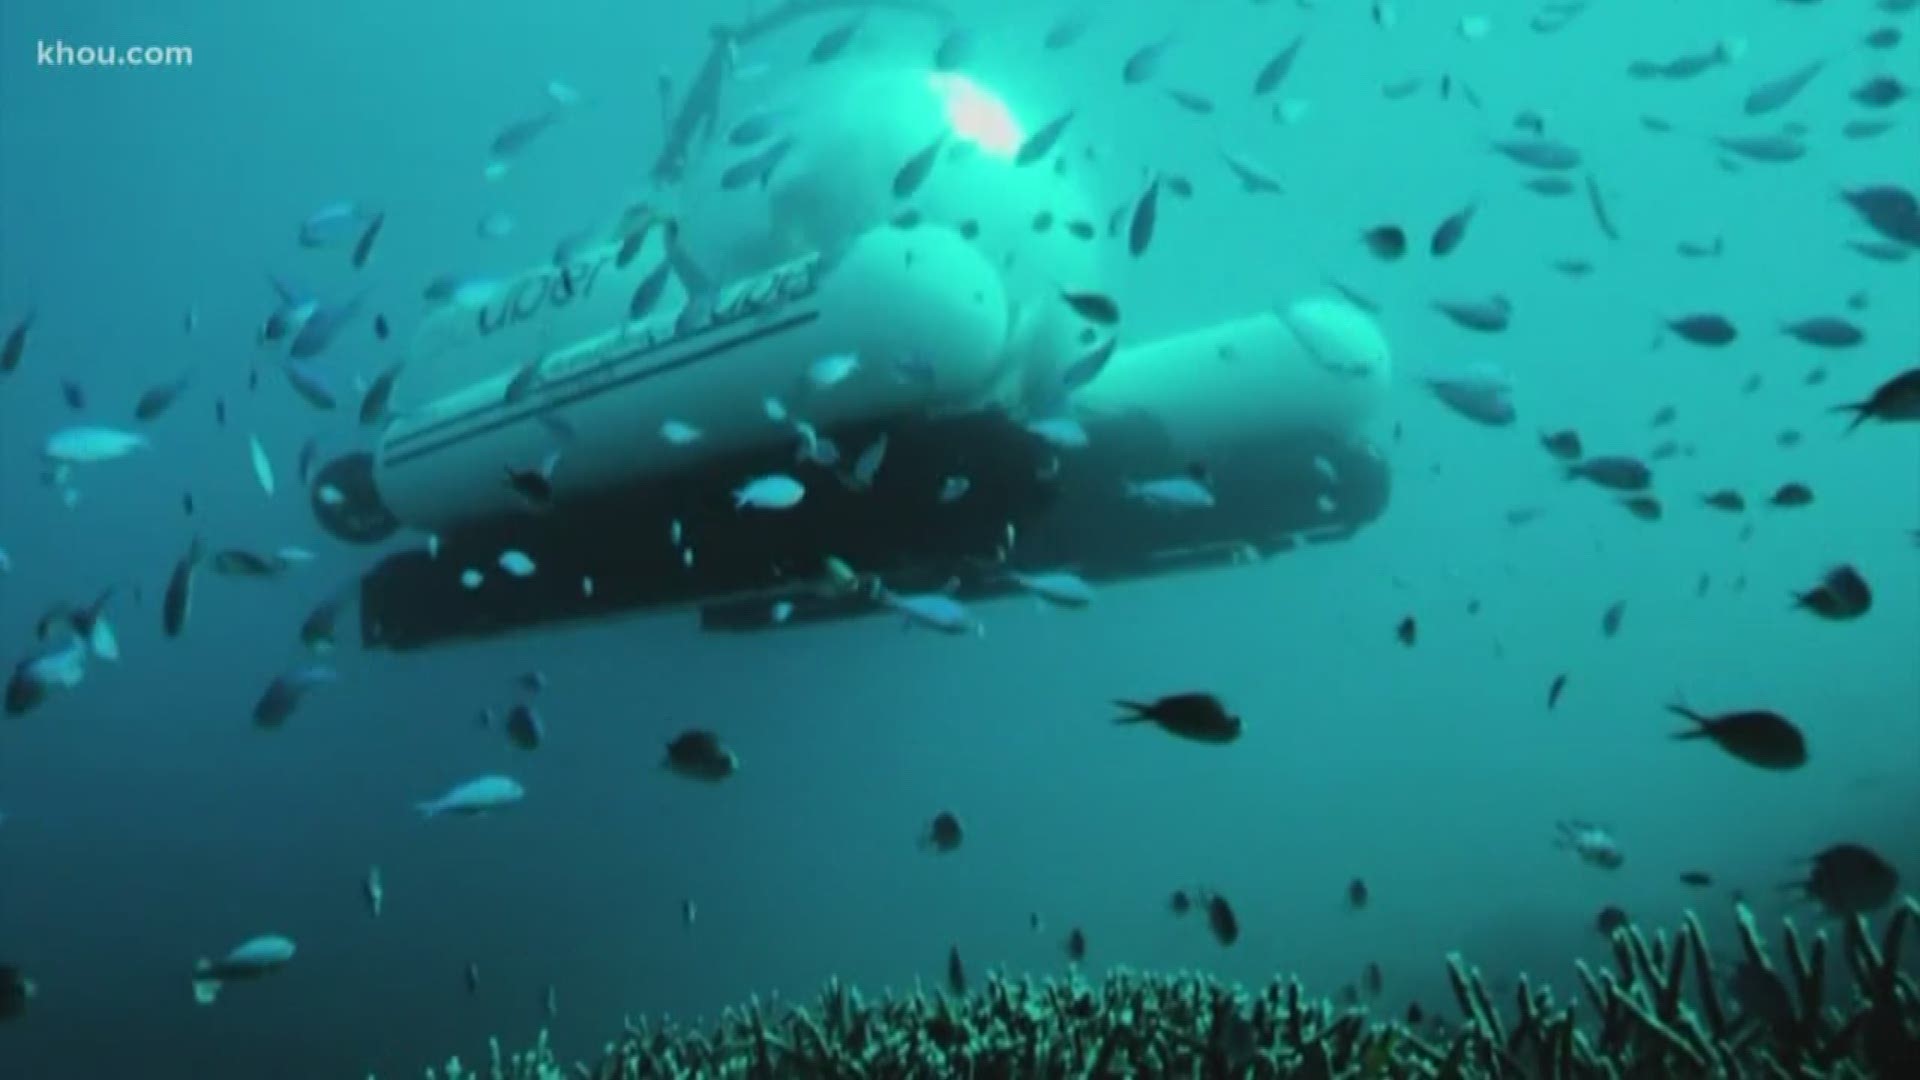 Uber is going from the roads to the reefs with their new rideshare called Scuber! The ridesharing submarine takes passengers underwater but each ride comes at a high price.